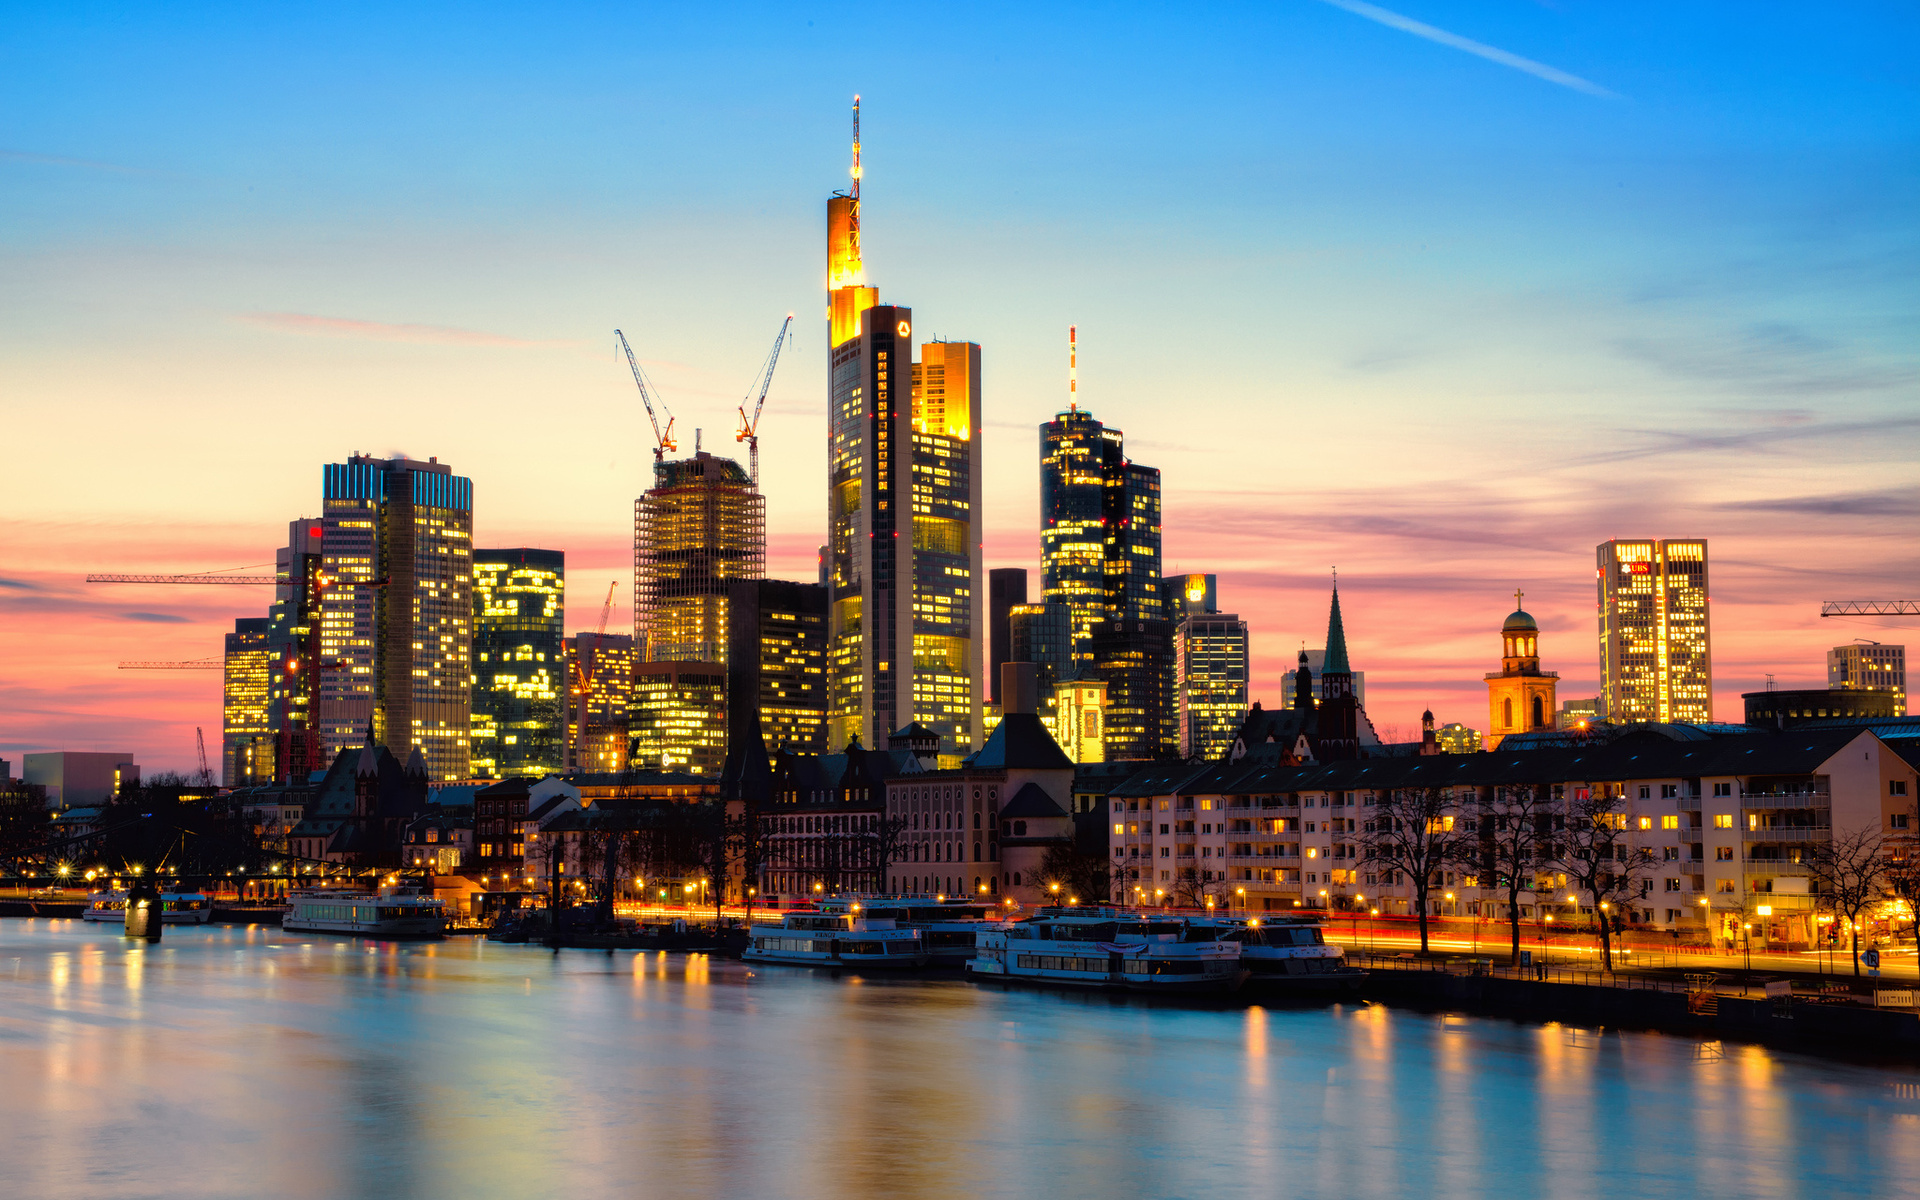 frankfurt, Am, Main, Deutschland, Germany, Germany, The, City, Night, Sunset, The, River, Main, The, Lights, Skyscrapers, Houses, Skyscrapers Wallpaper